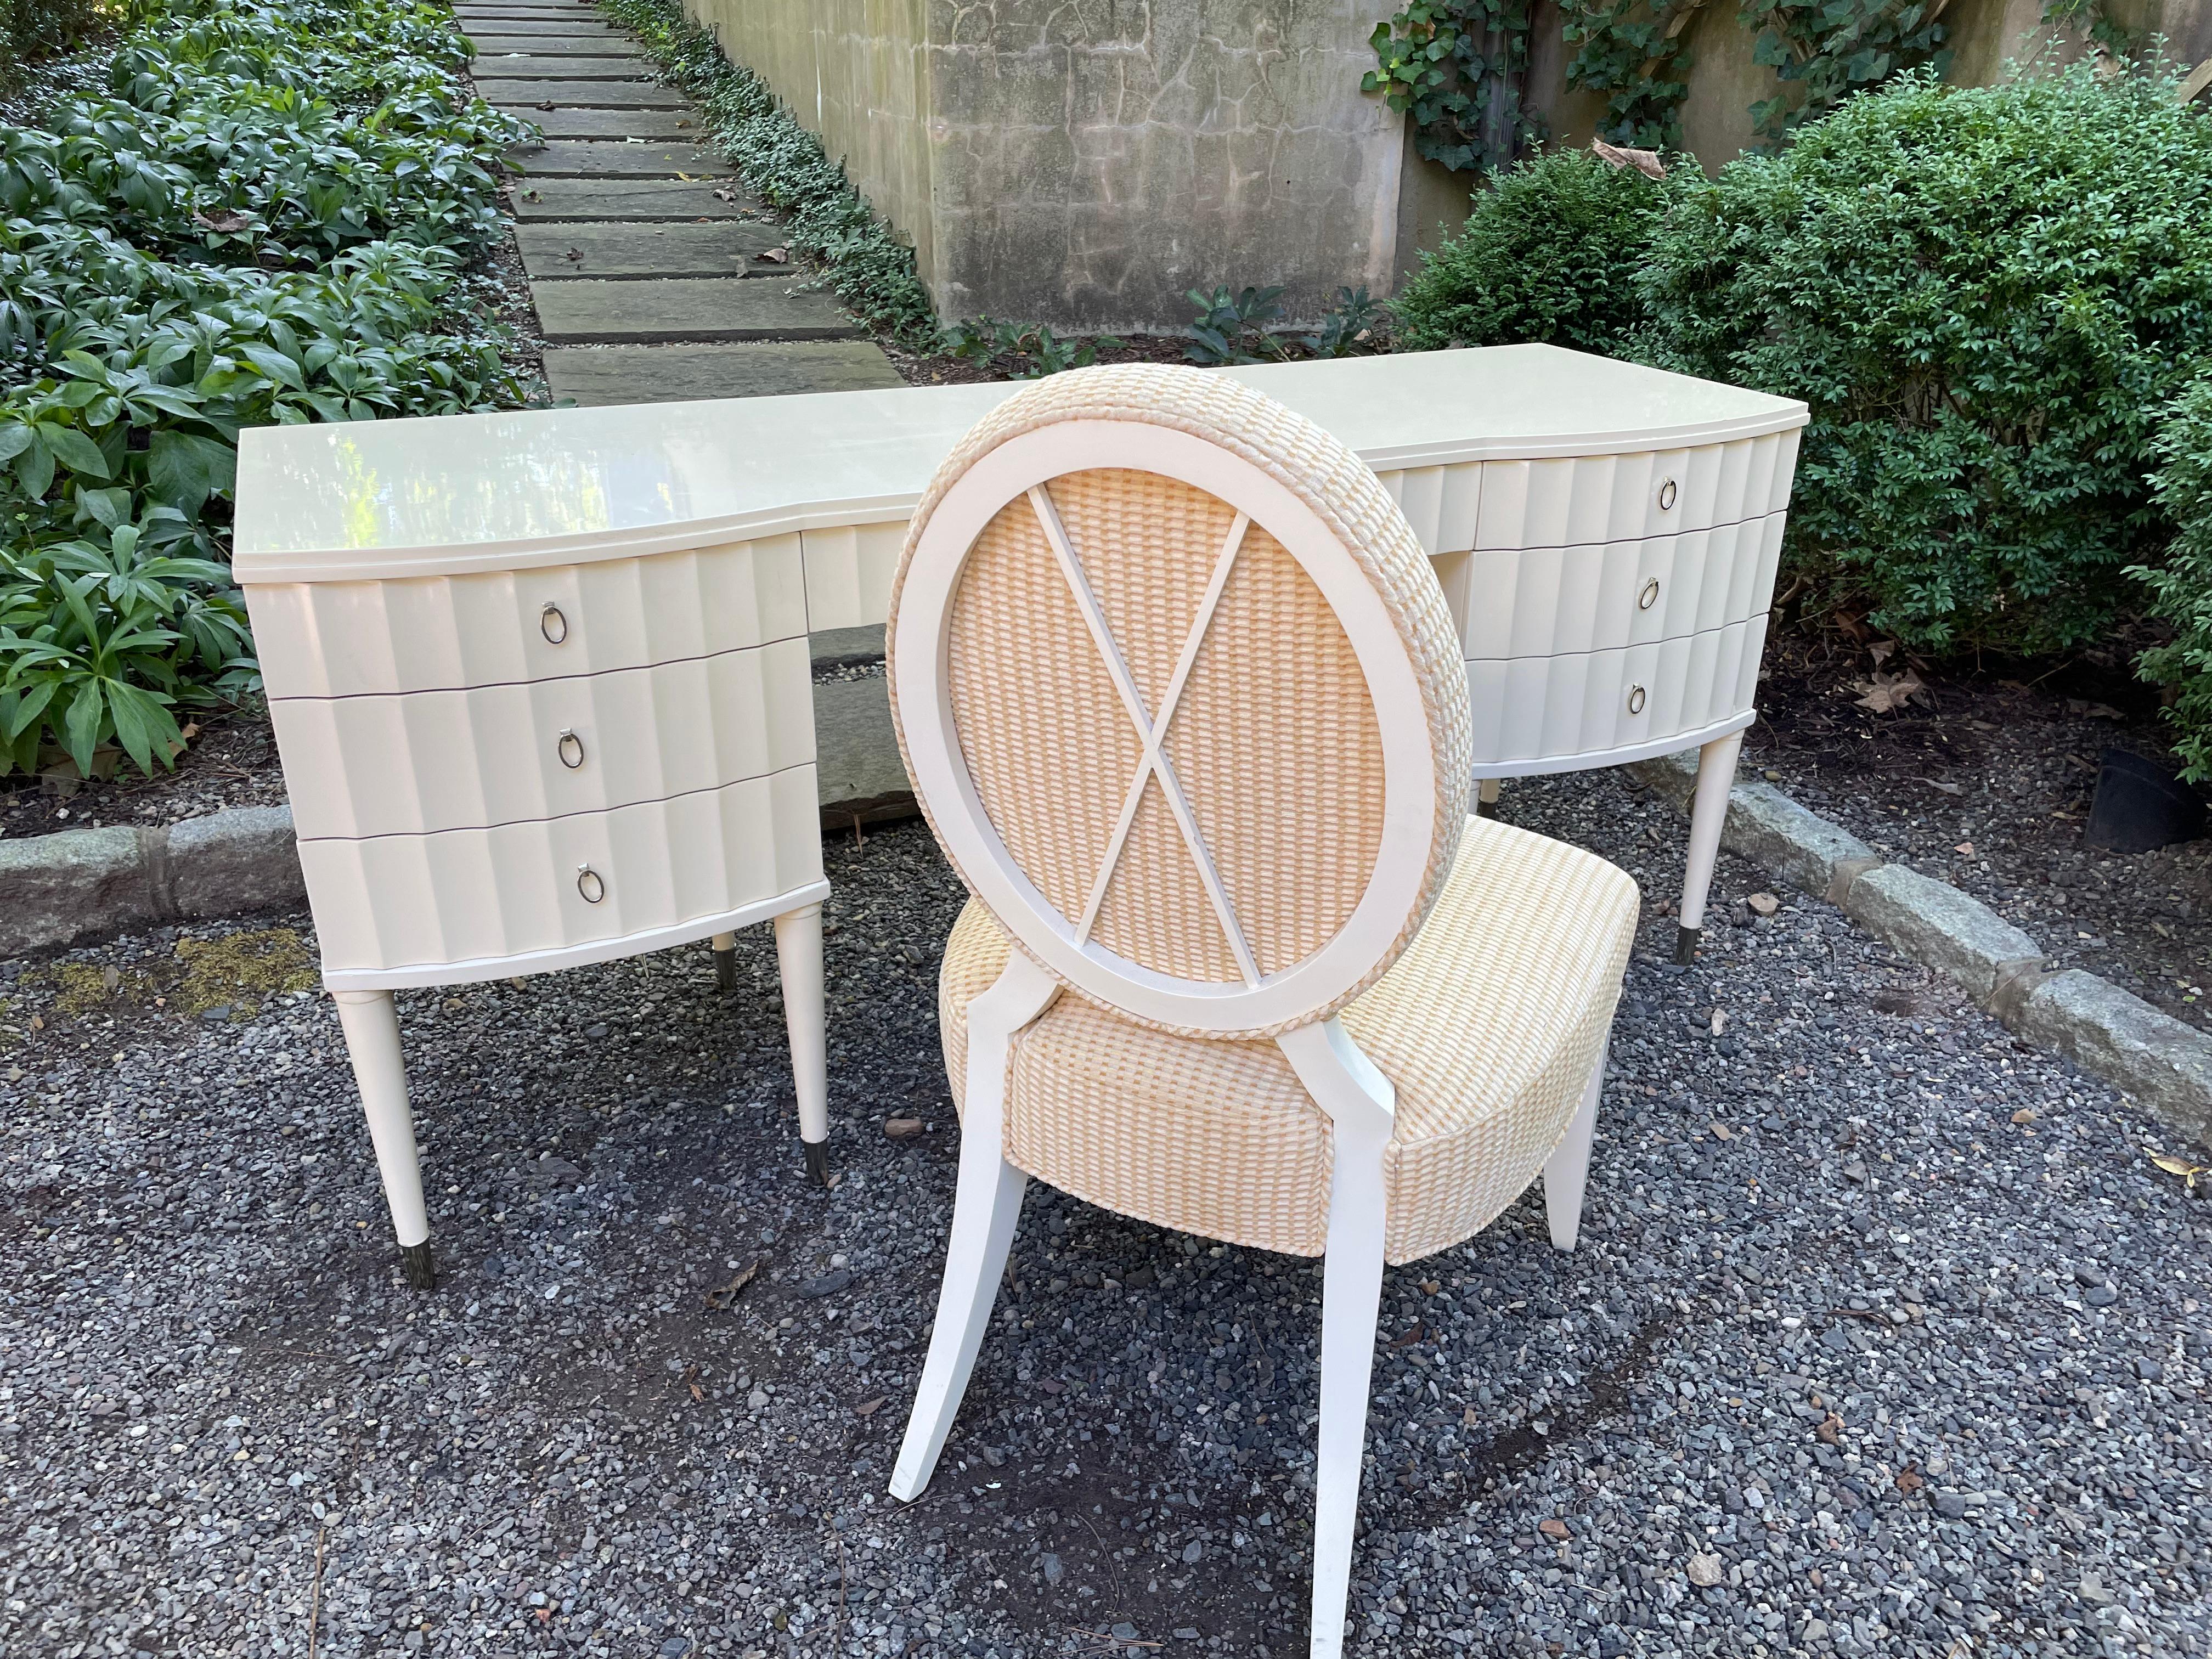 Glamorous designer desk or vanity and accompanying chair by Barbara Barry for Baker. Both are finished in a cream colored lacquer. The desk has seven fluted drawers. The feet of the desk are each cuffed in brushed nickel. Knee clearance measures